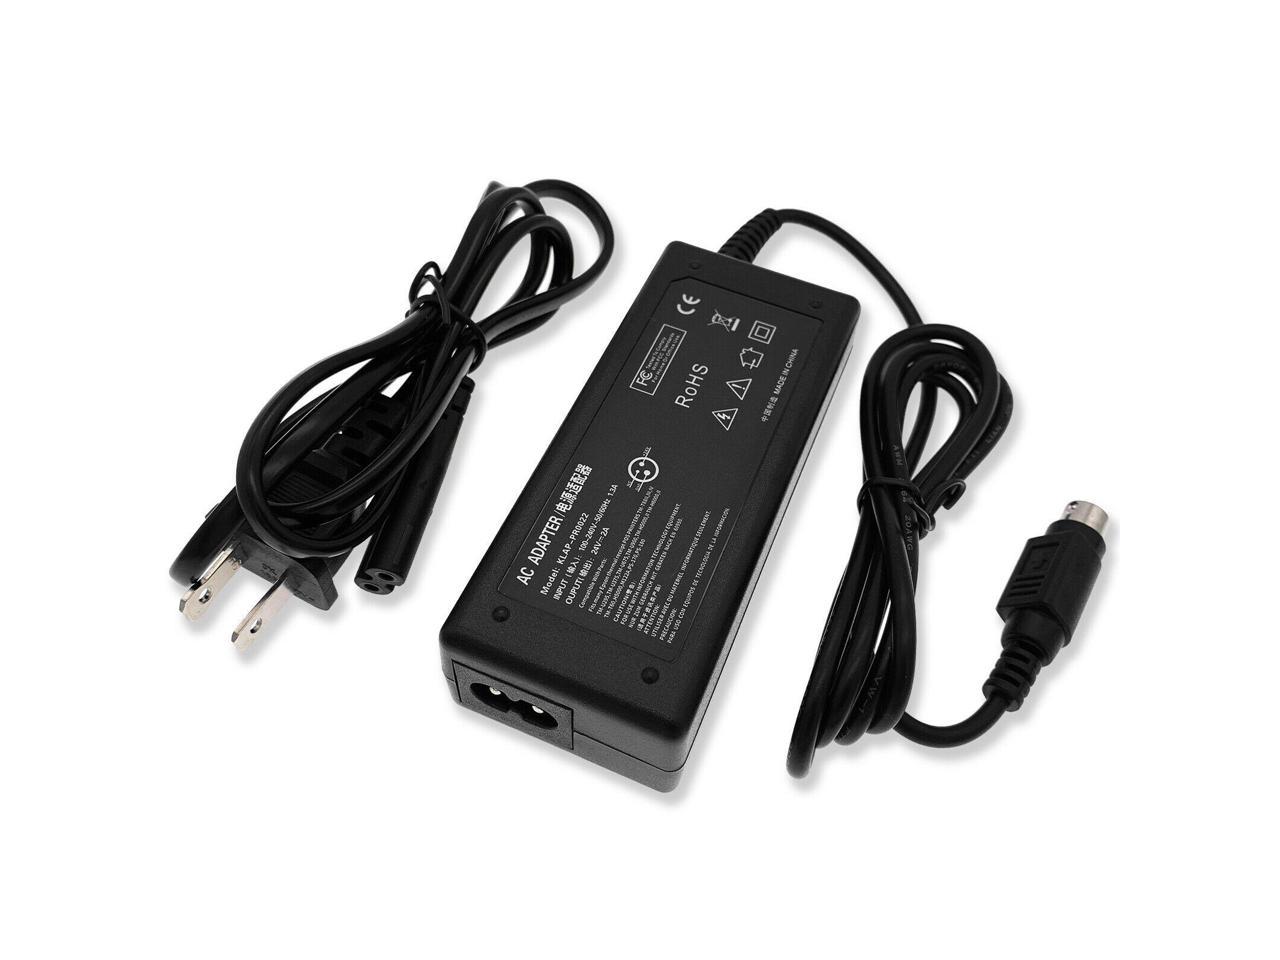 NEW Epson PS-180 AC Adapter Power Supply M159B M159A Printers C8255343 US 